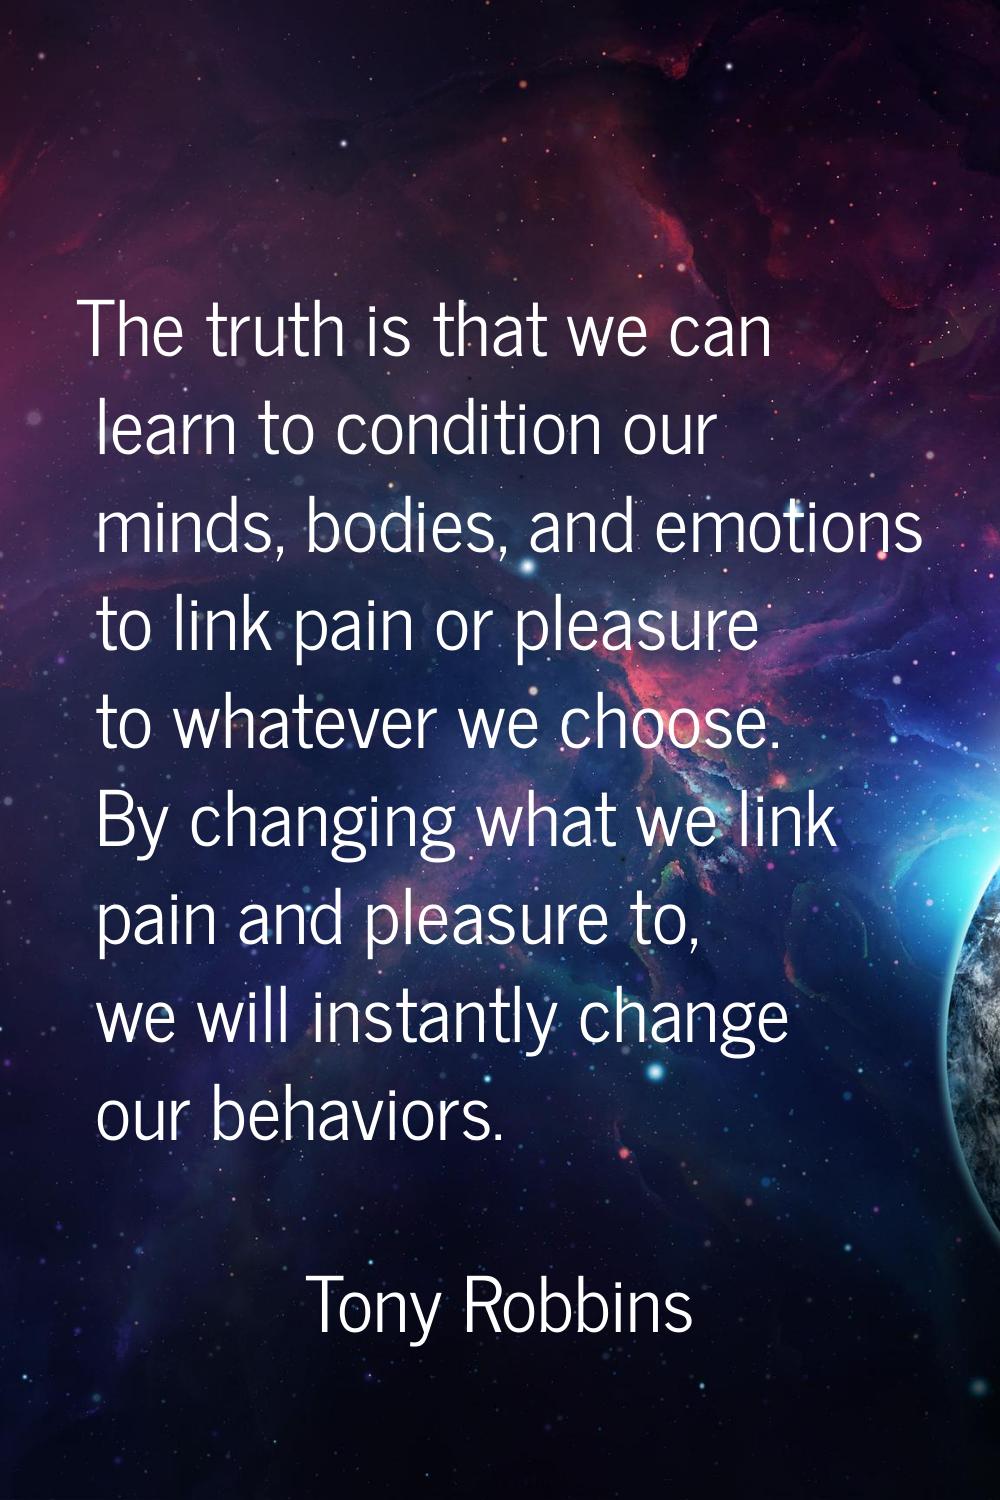 The truth is that we can learn to condition our minds, bodies, and emotions to link pain or pleasur